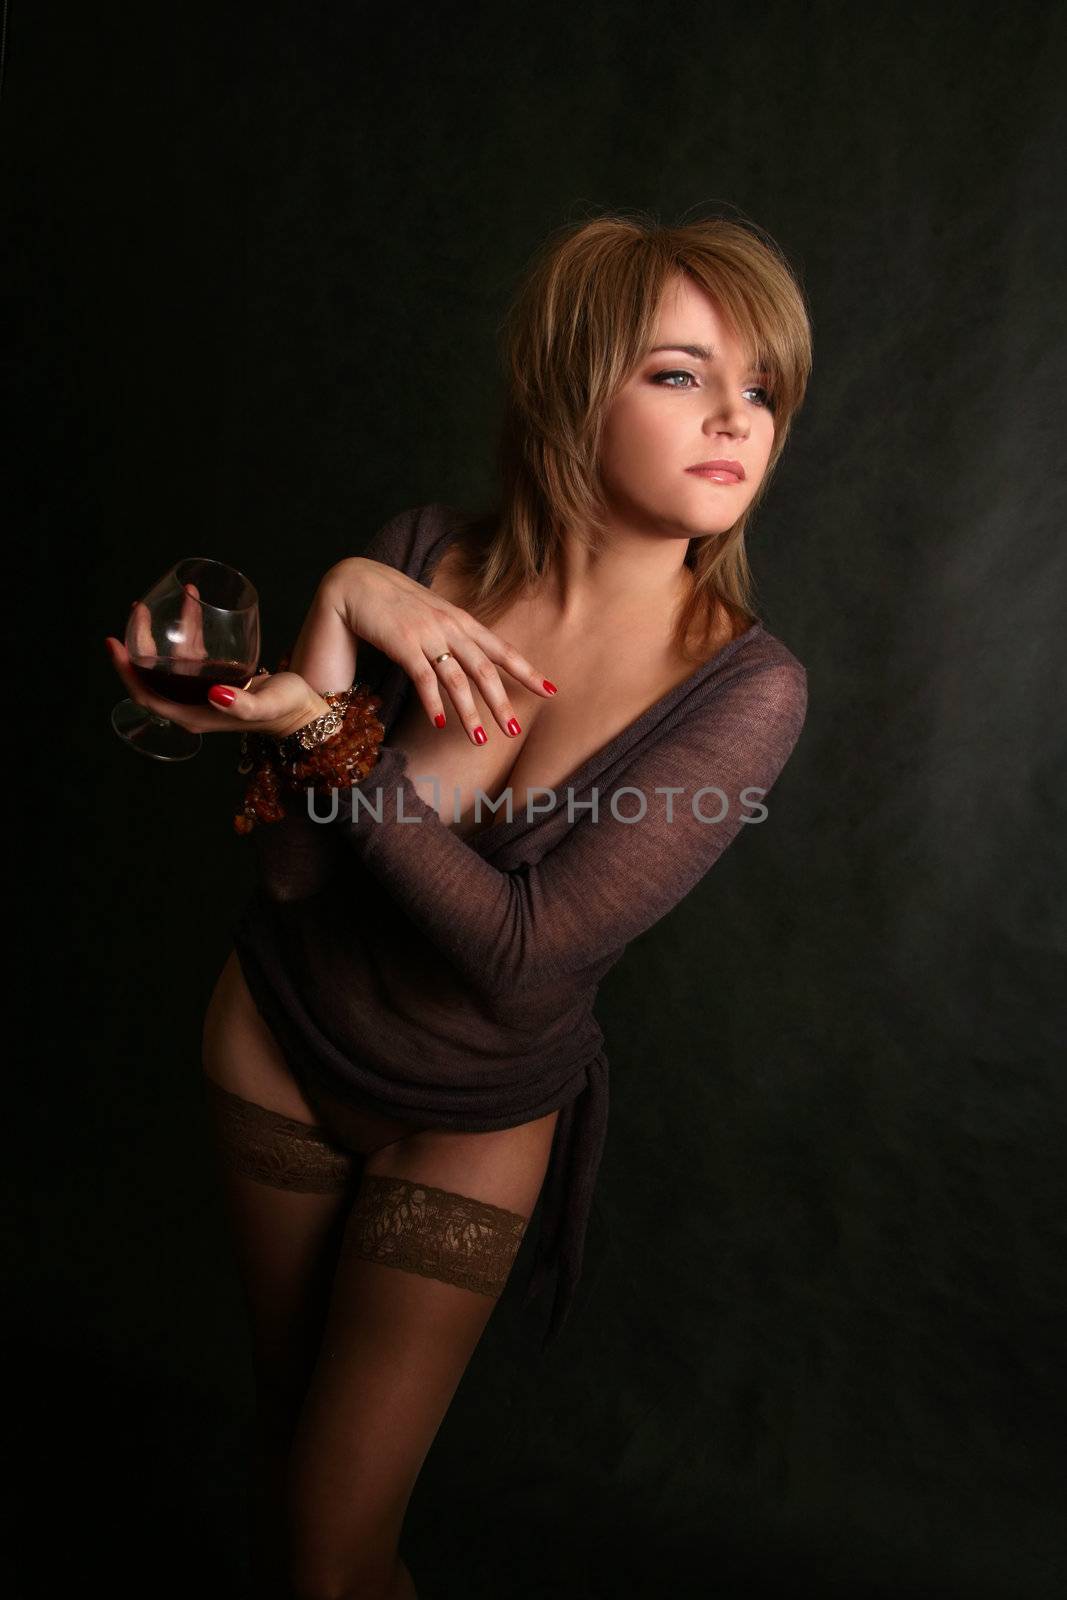 Portrait of the fine woman with a glass of cognac